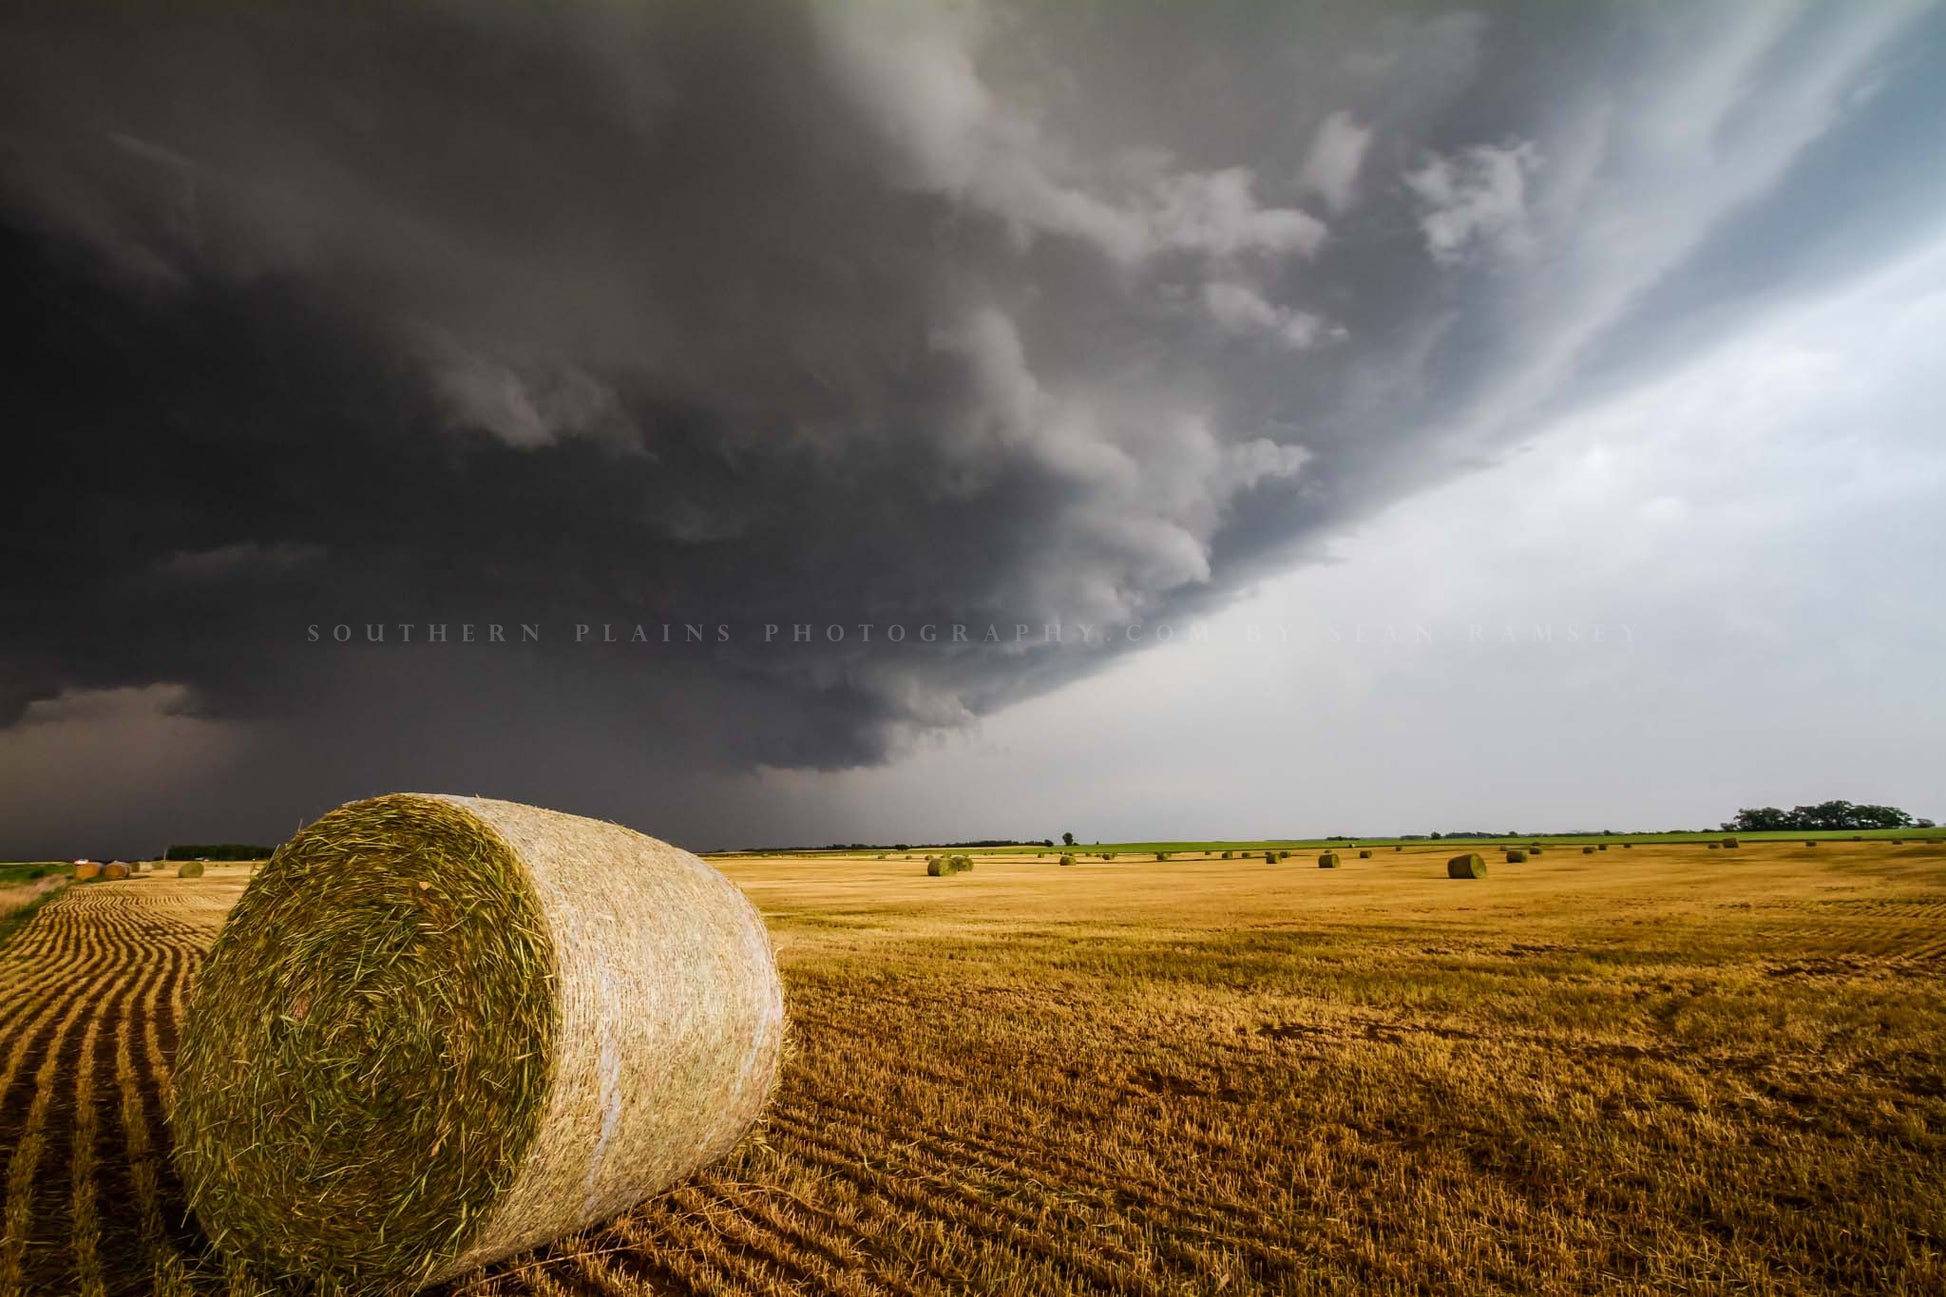 Country photography print of a storm advancing over a golden round hay bale in a field on a stormy spring day in Kansas by Sean Ramsey of Southern Plains Photography.